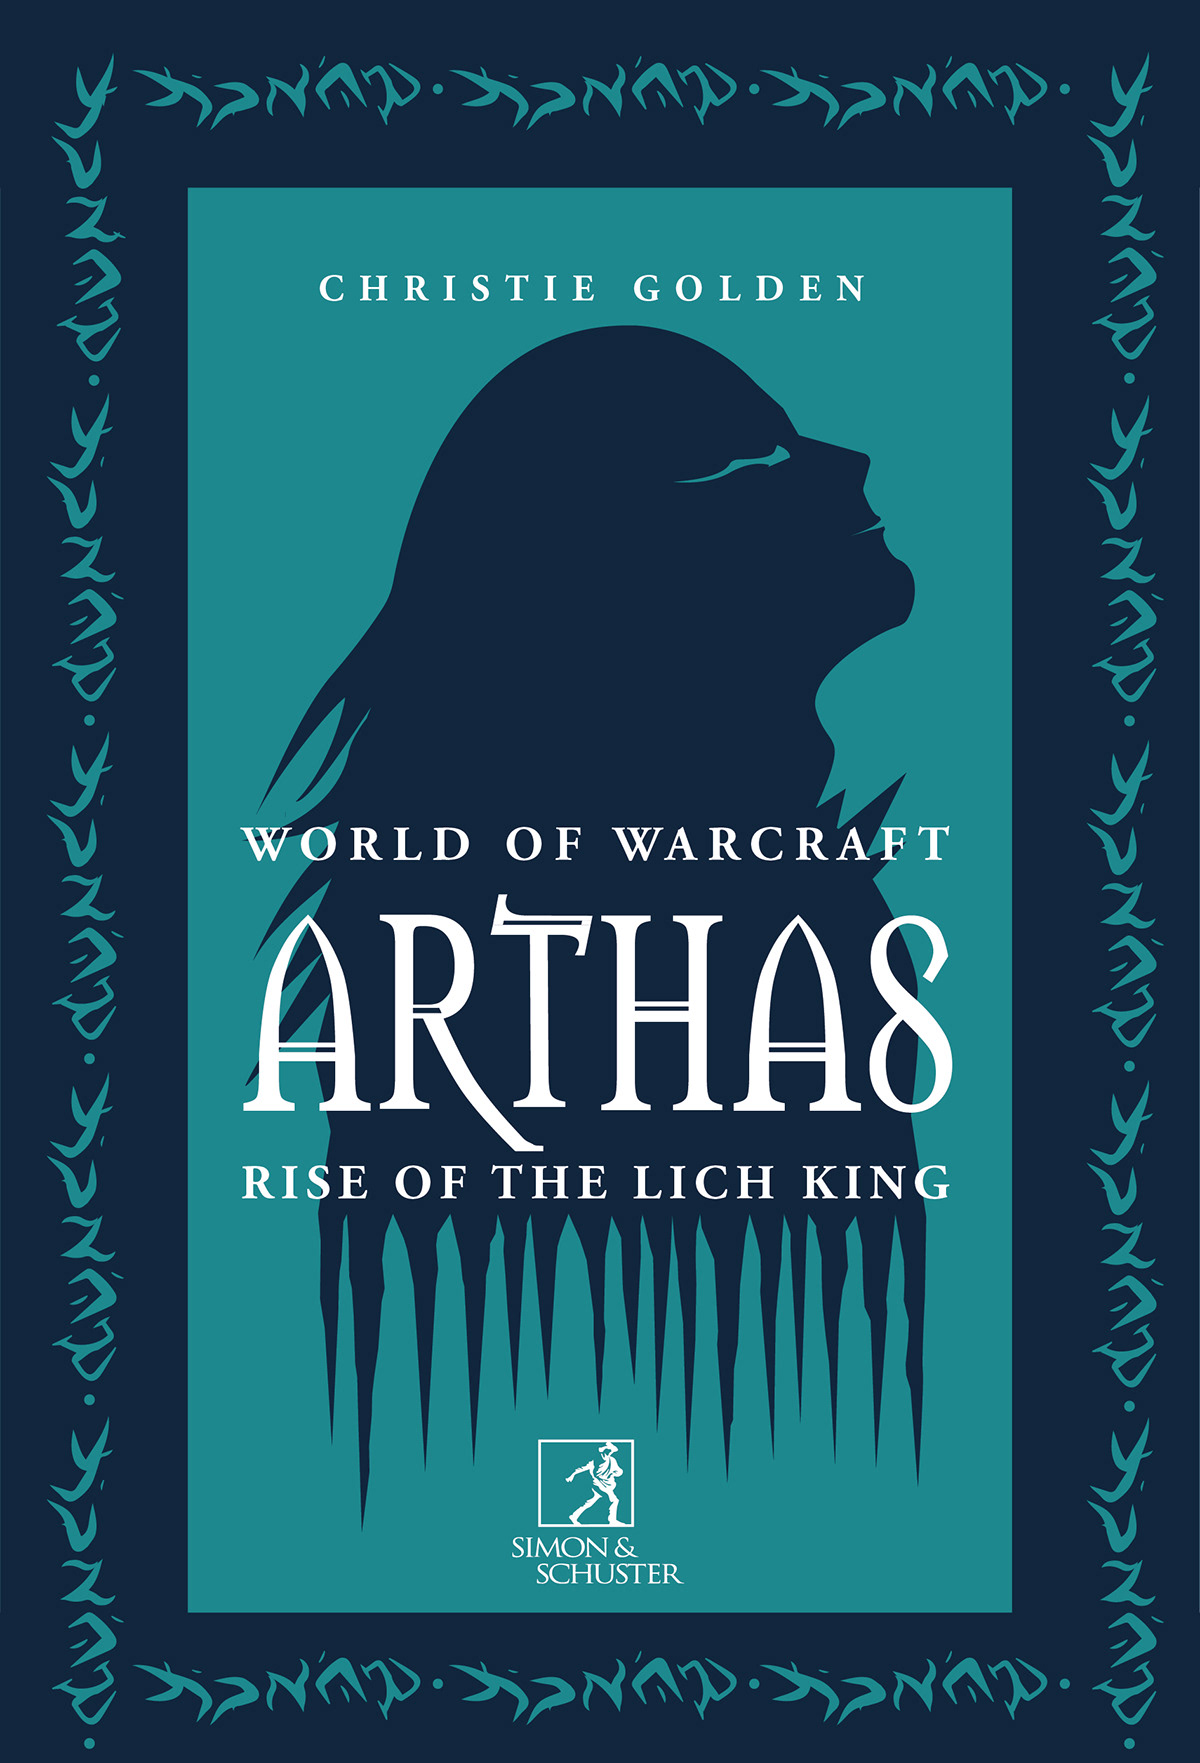 World of Warcraft Arthas:Rise of the Lich King on Behance